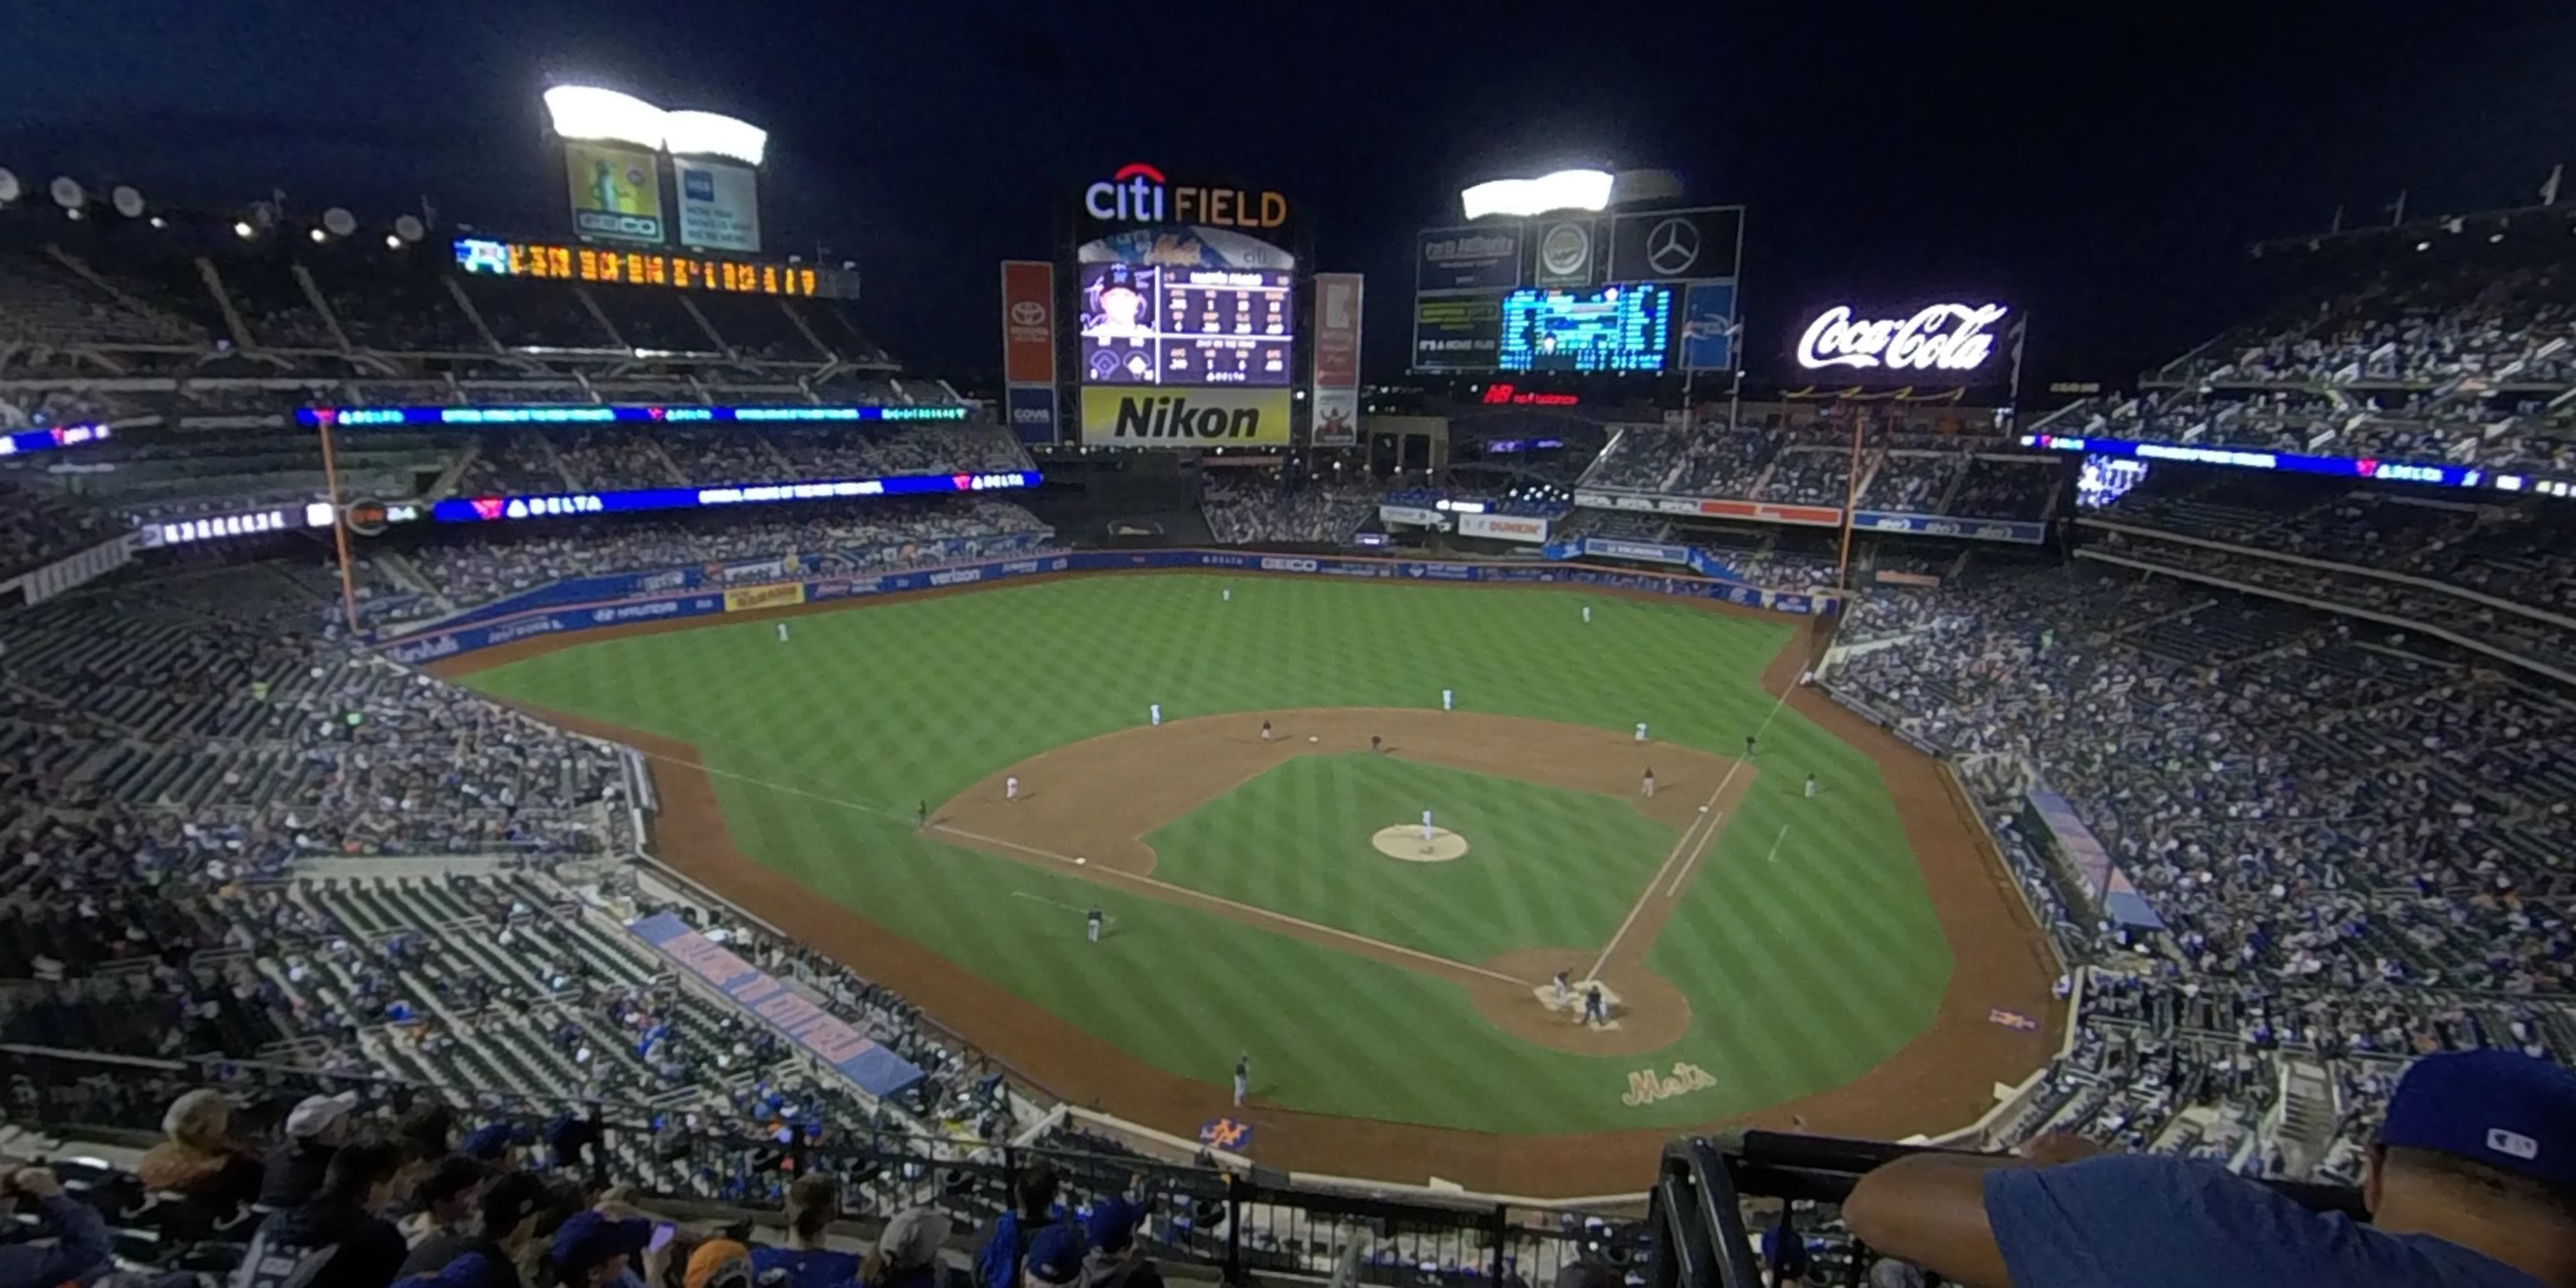 section 417 panoramic seat view  - citi field